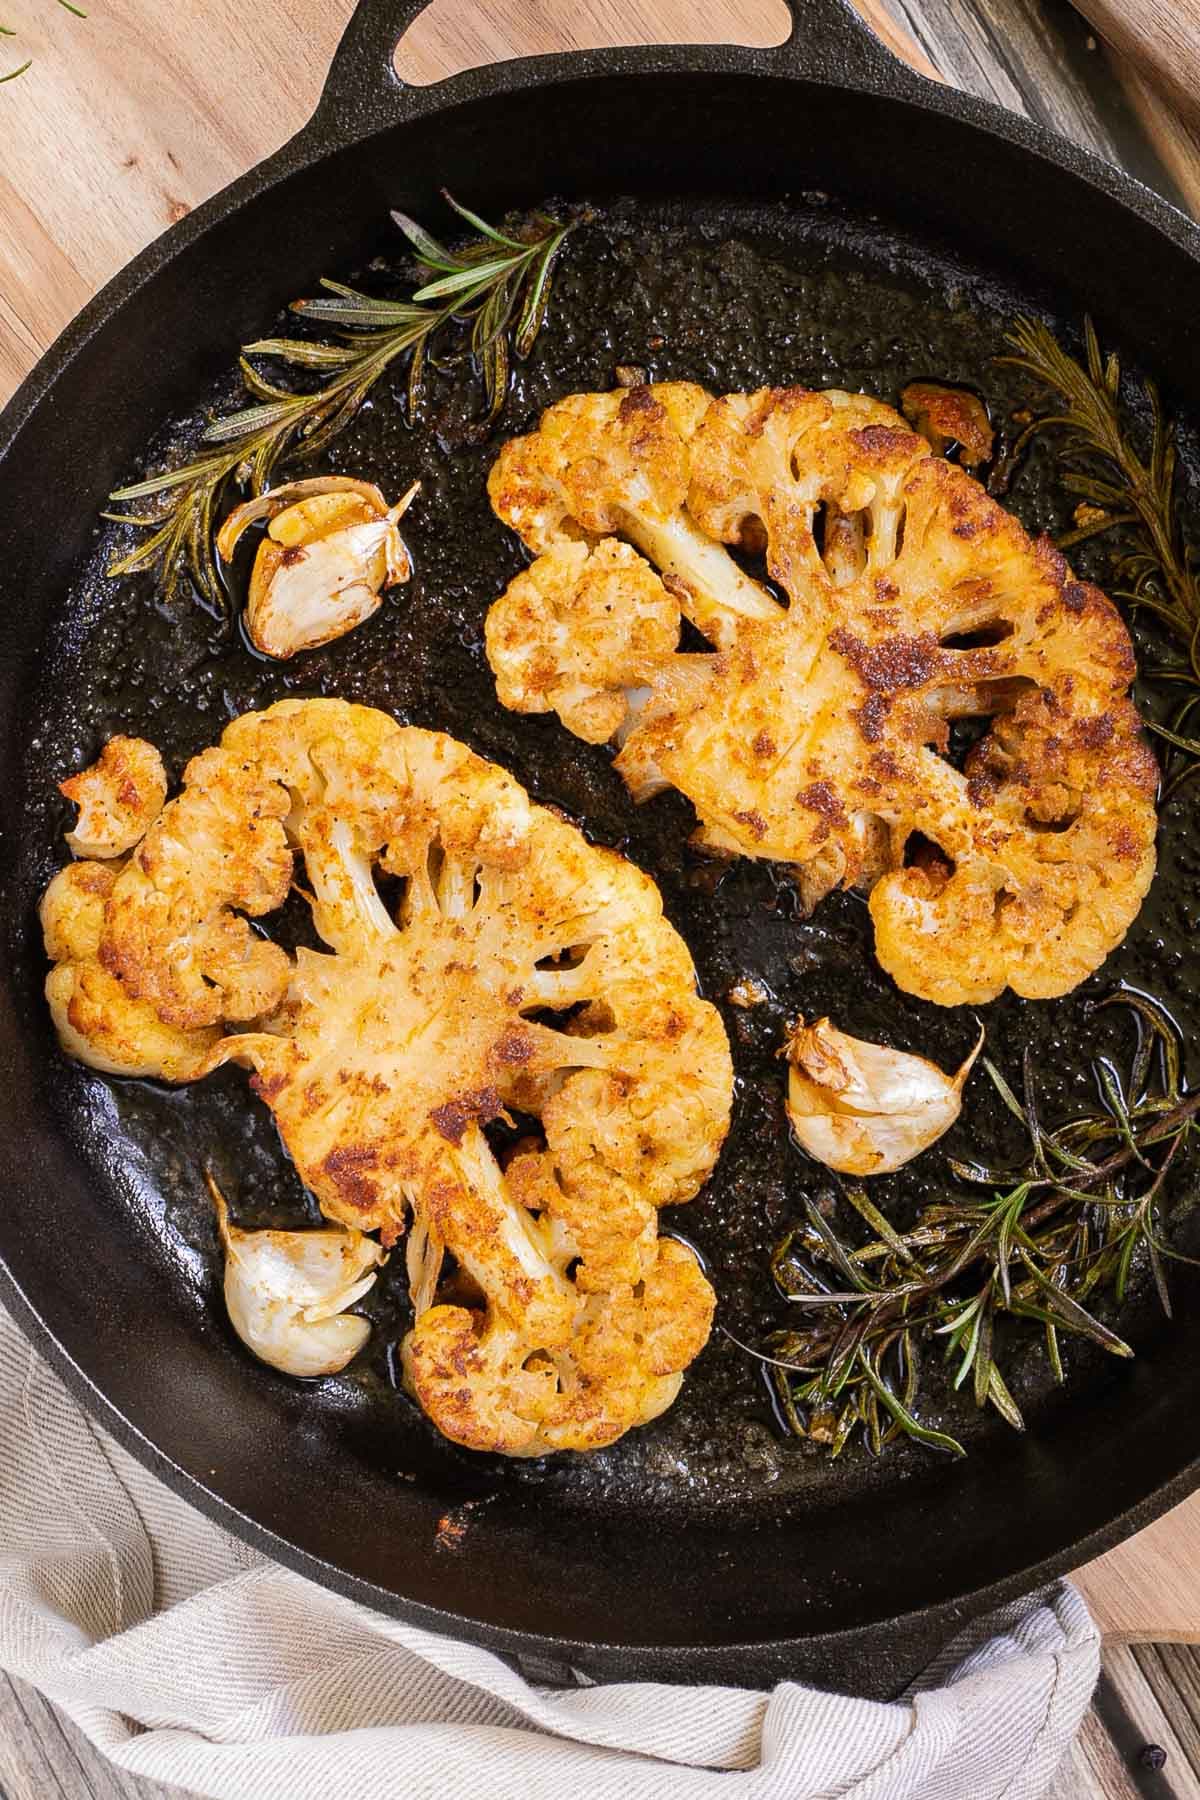 2 crispy brown yellow cauliflower slices in a cast-iron skillet surrounded by roasted garlic cloves and wilted rosemary twigs.